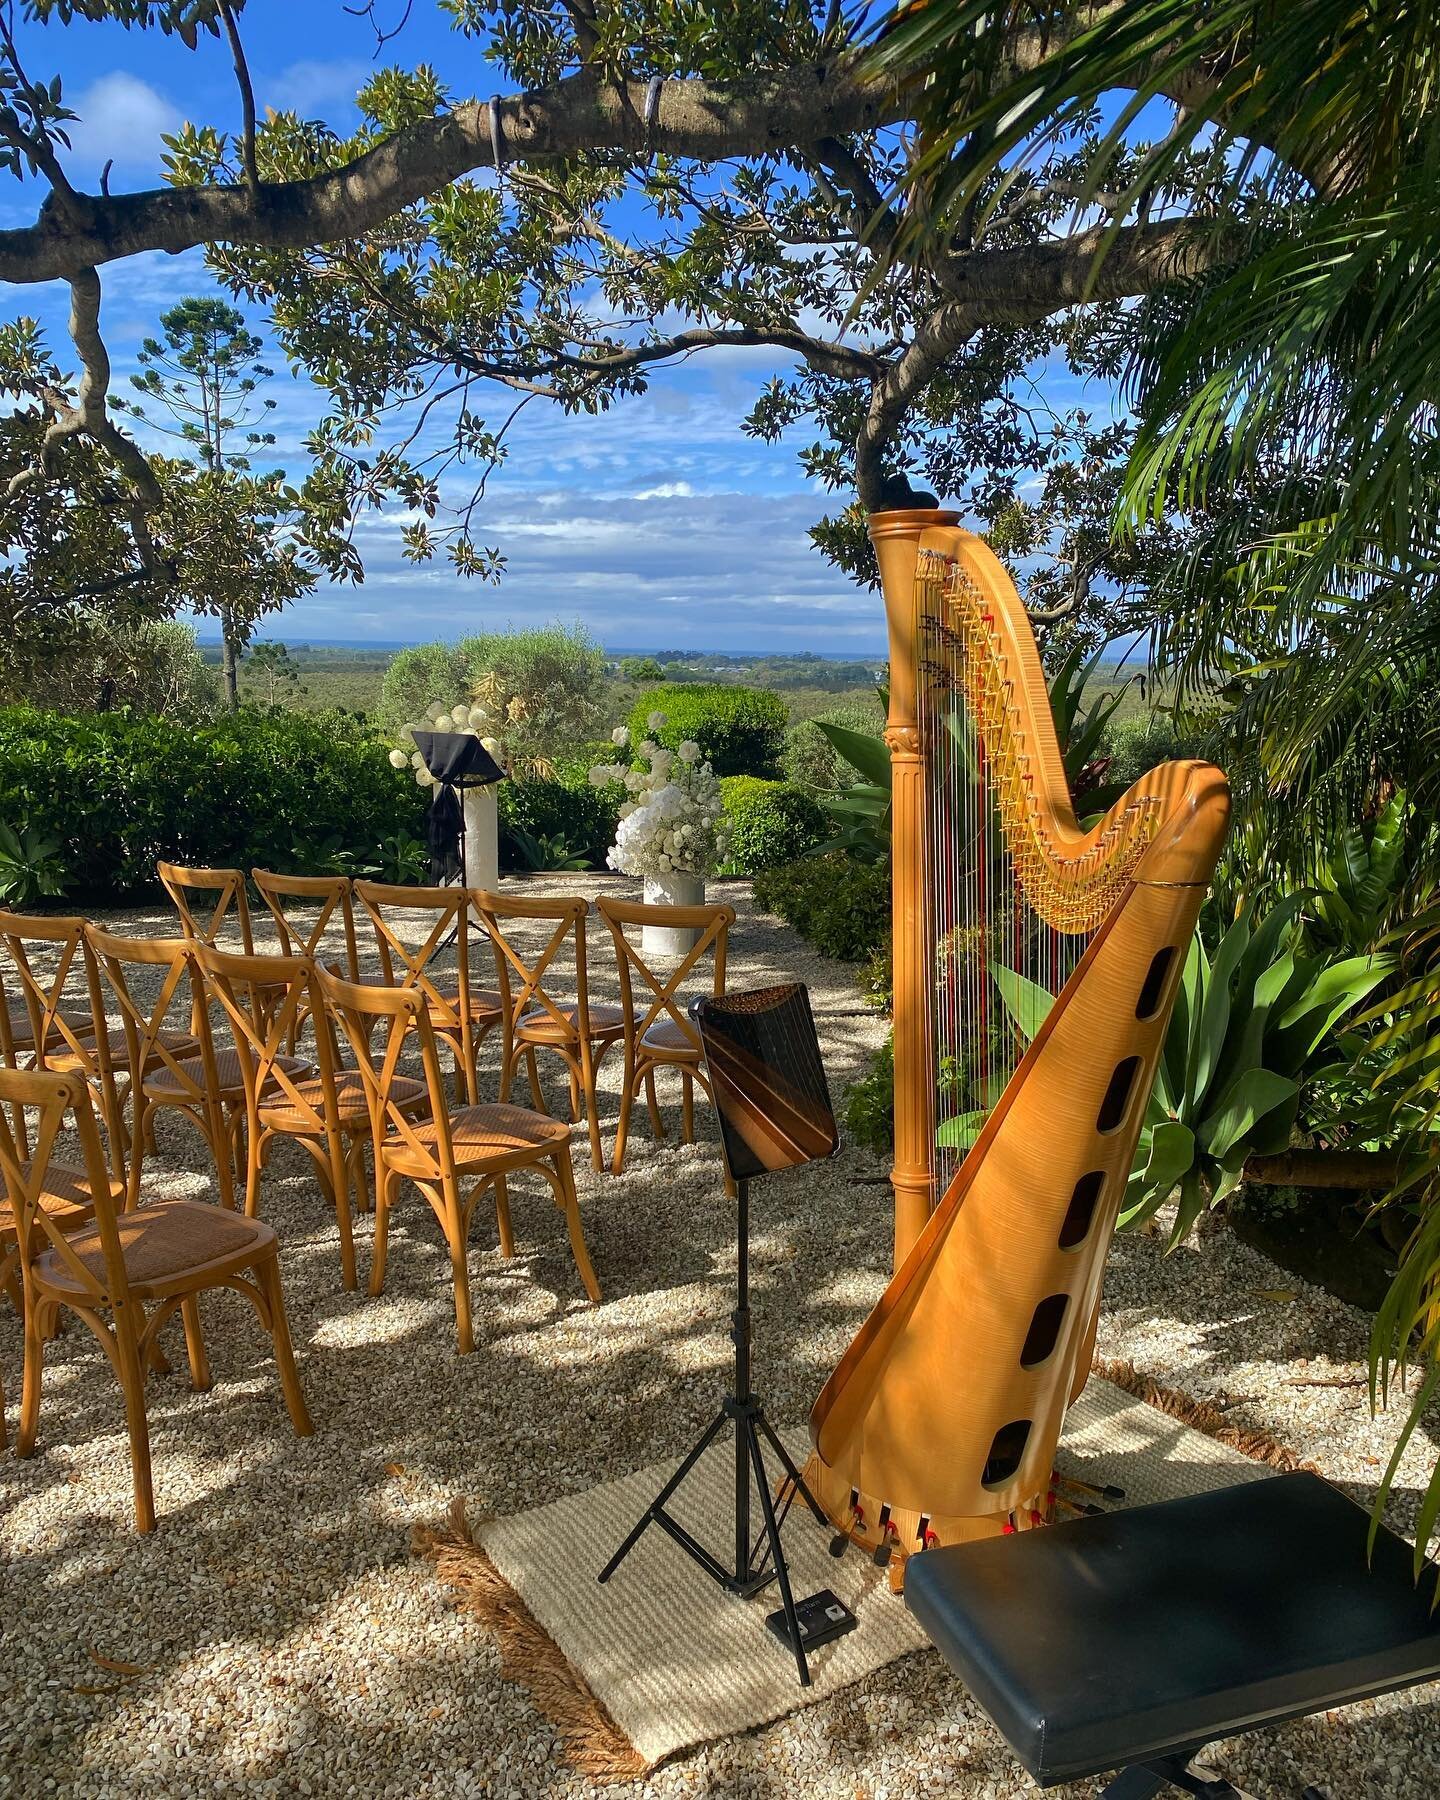 Nothing to see here, just your typical/regular office views of the last couple of weeks

📍Fig Tree Restaurant, Byron Bay
📍St Johns Cathedral, Brisbane 
📍The Grove, Brisbane
📍Redcliffe Leagues Club, Redcliffe
📍Old Museum Building, Brisbane

#harp